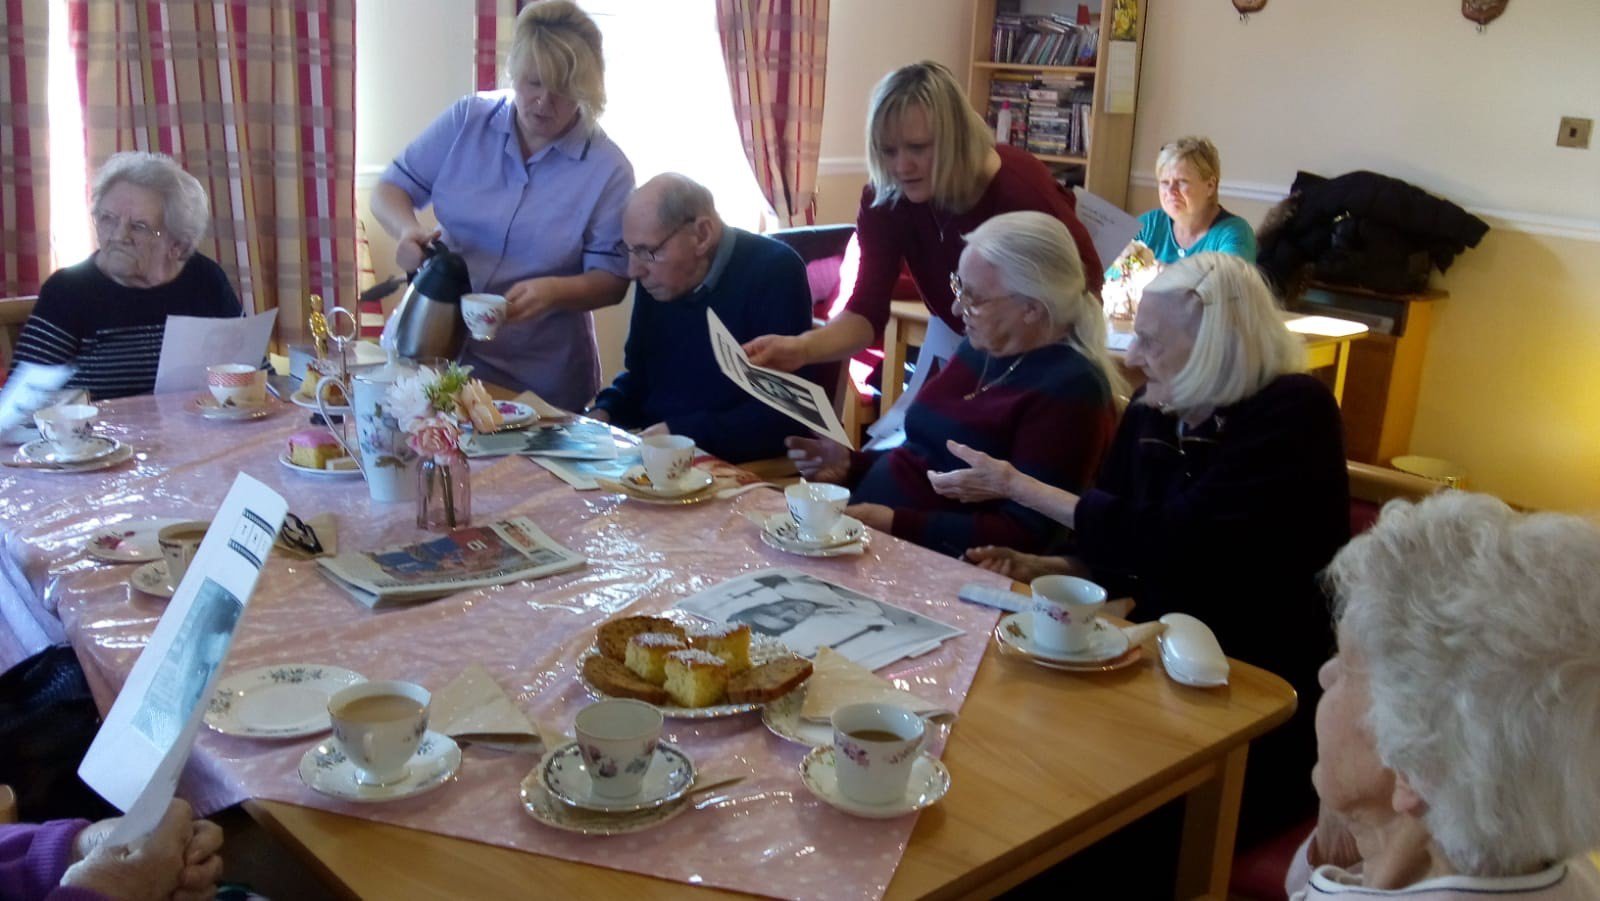 A picture of several older white people sitting around a table with tea and cakes